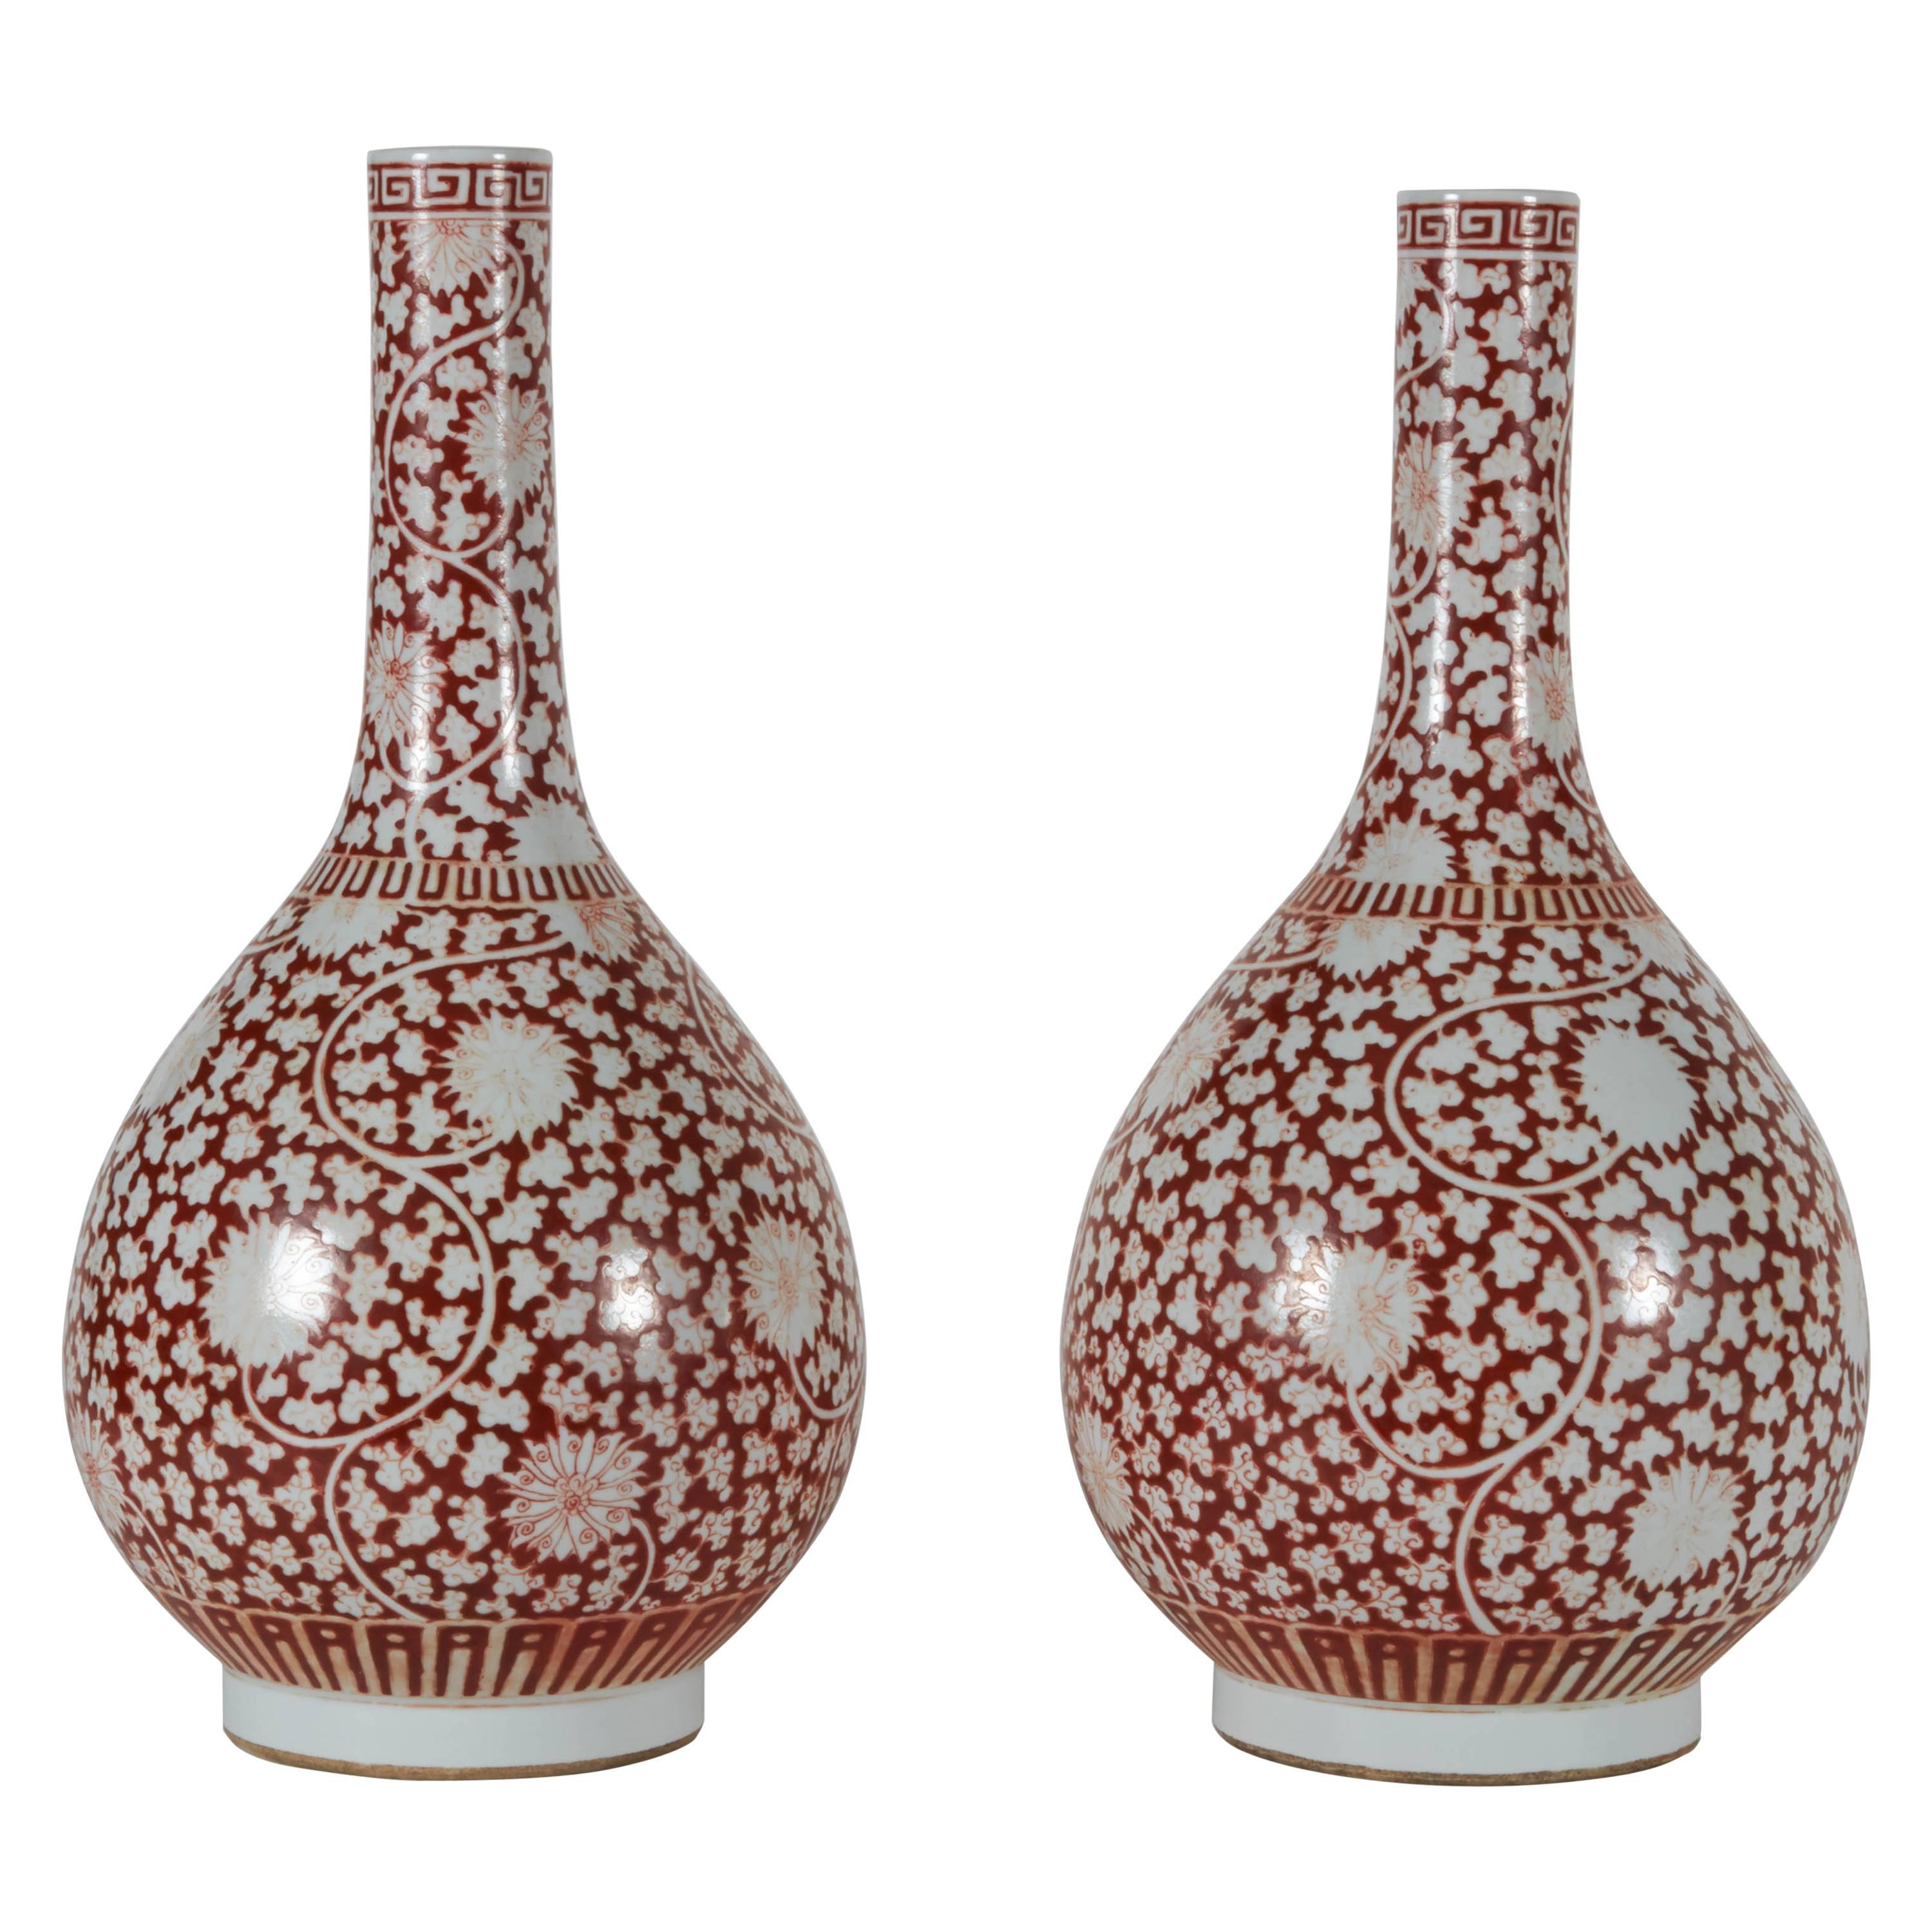 Fine Pair of Chinese Porcelain Bottle Shaped Vases,  Daoguang period (1821-1850)